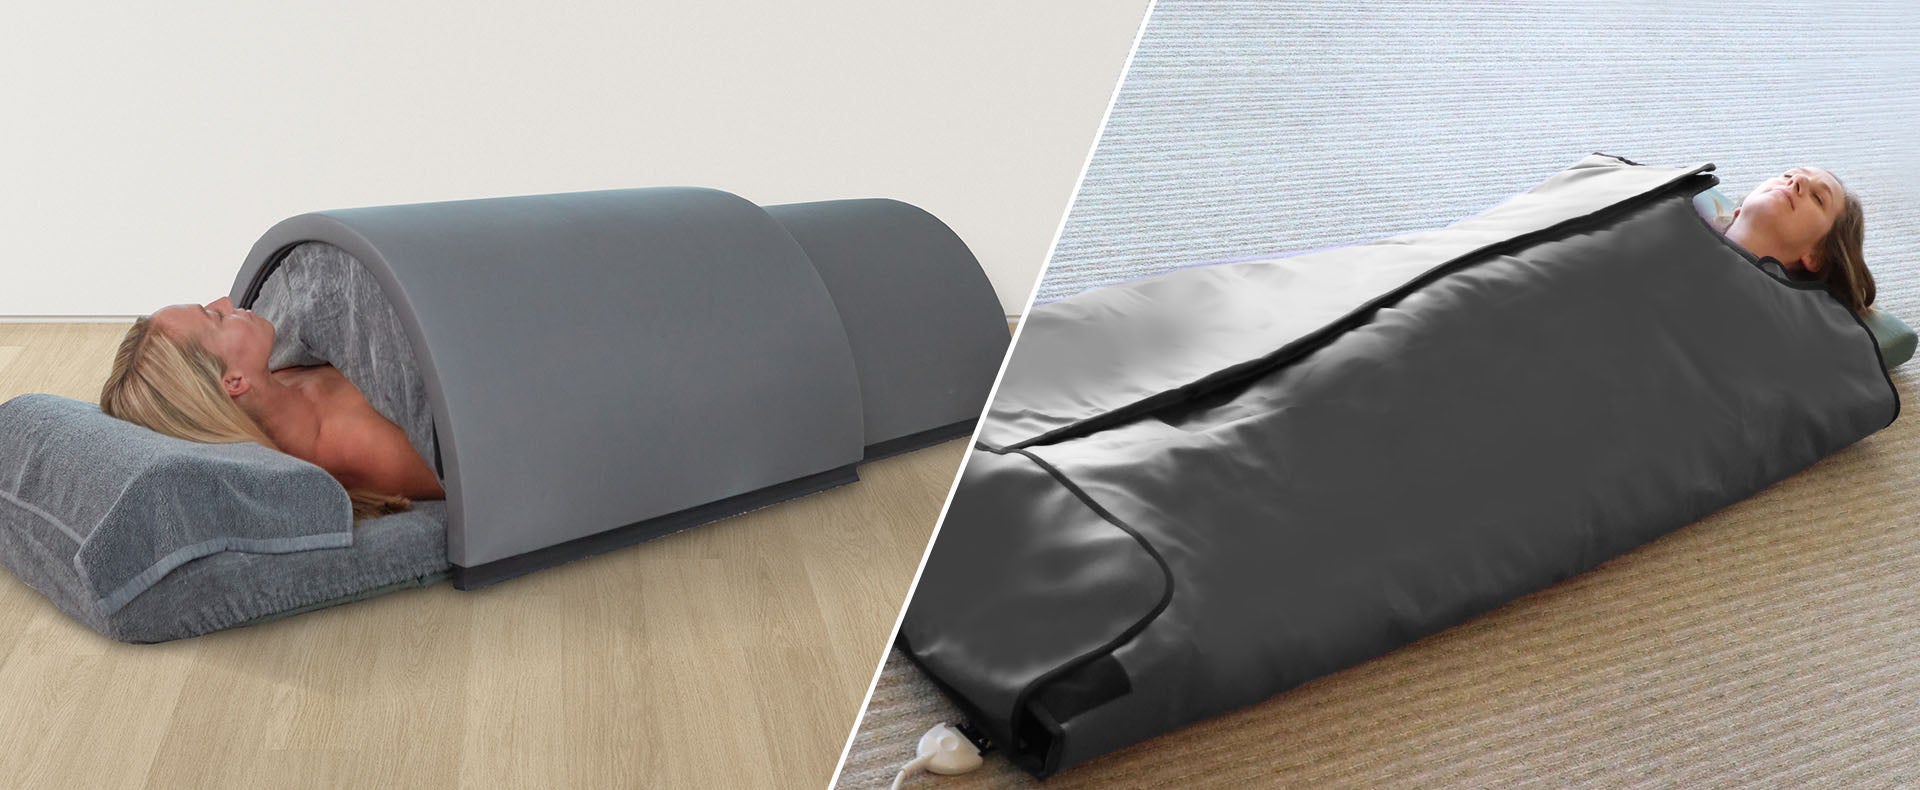 Solo System and Sauna Blanket side-by-side comparison